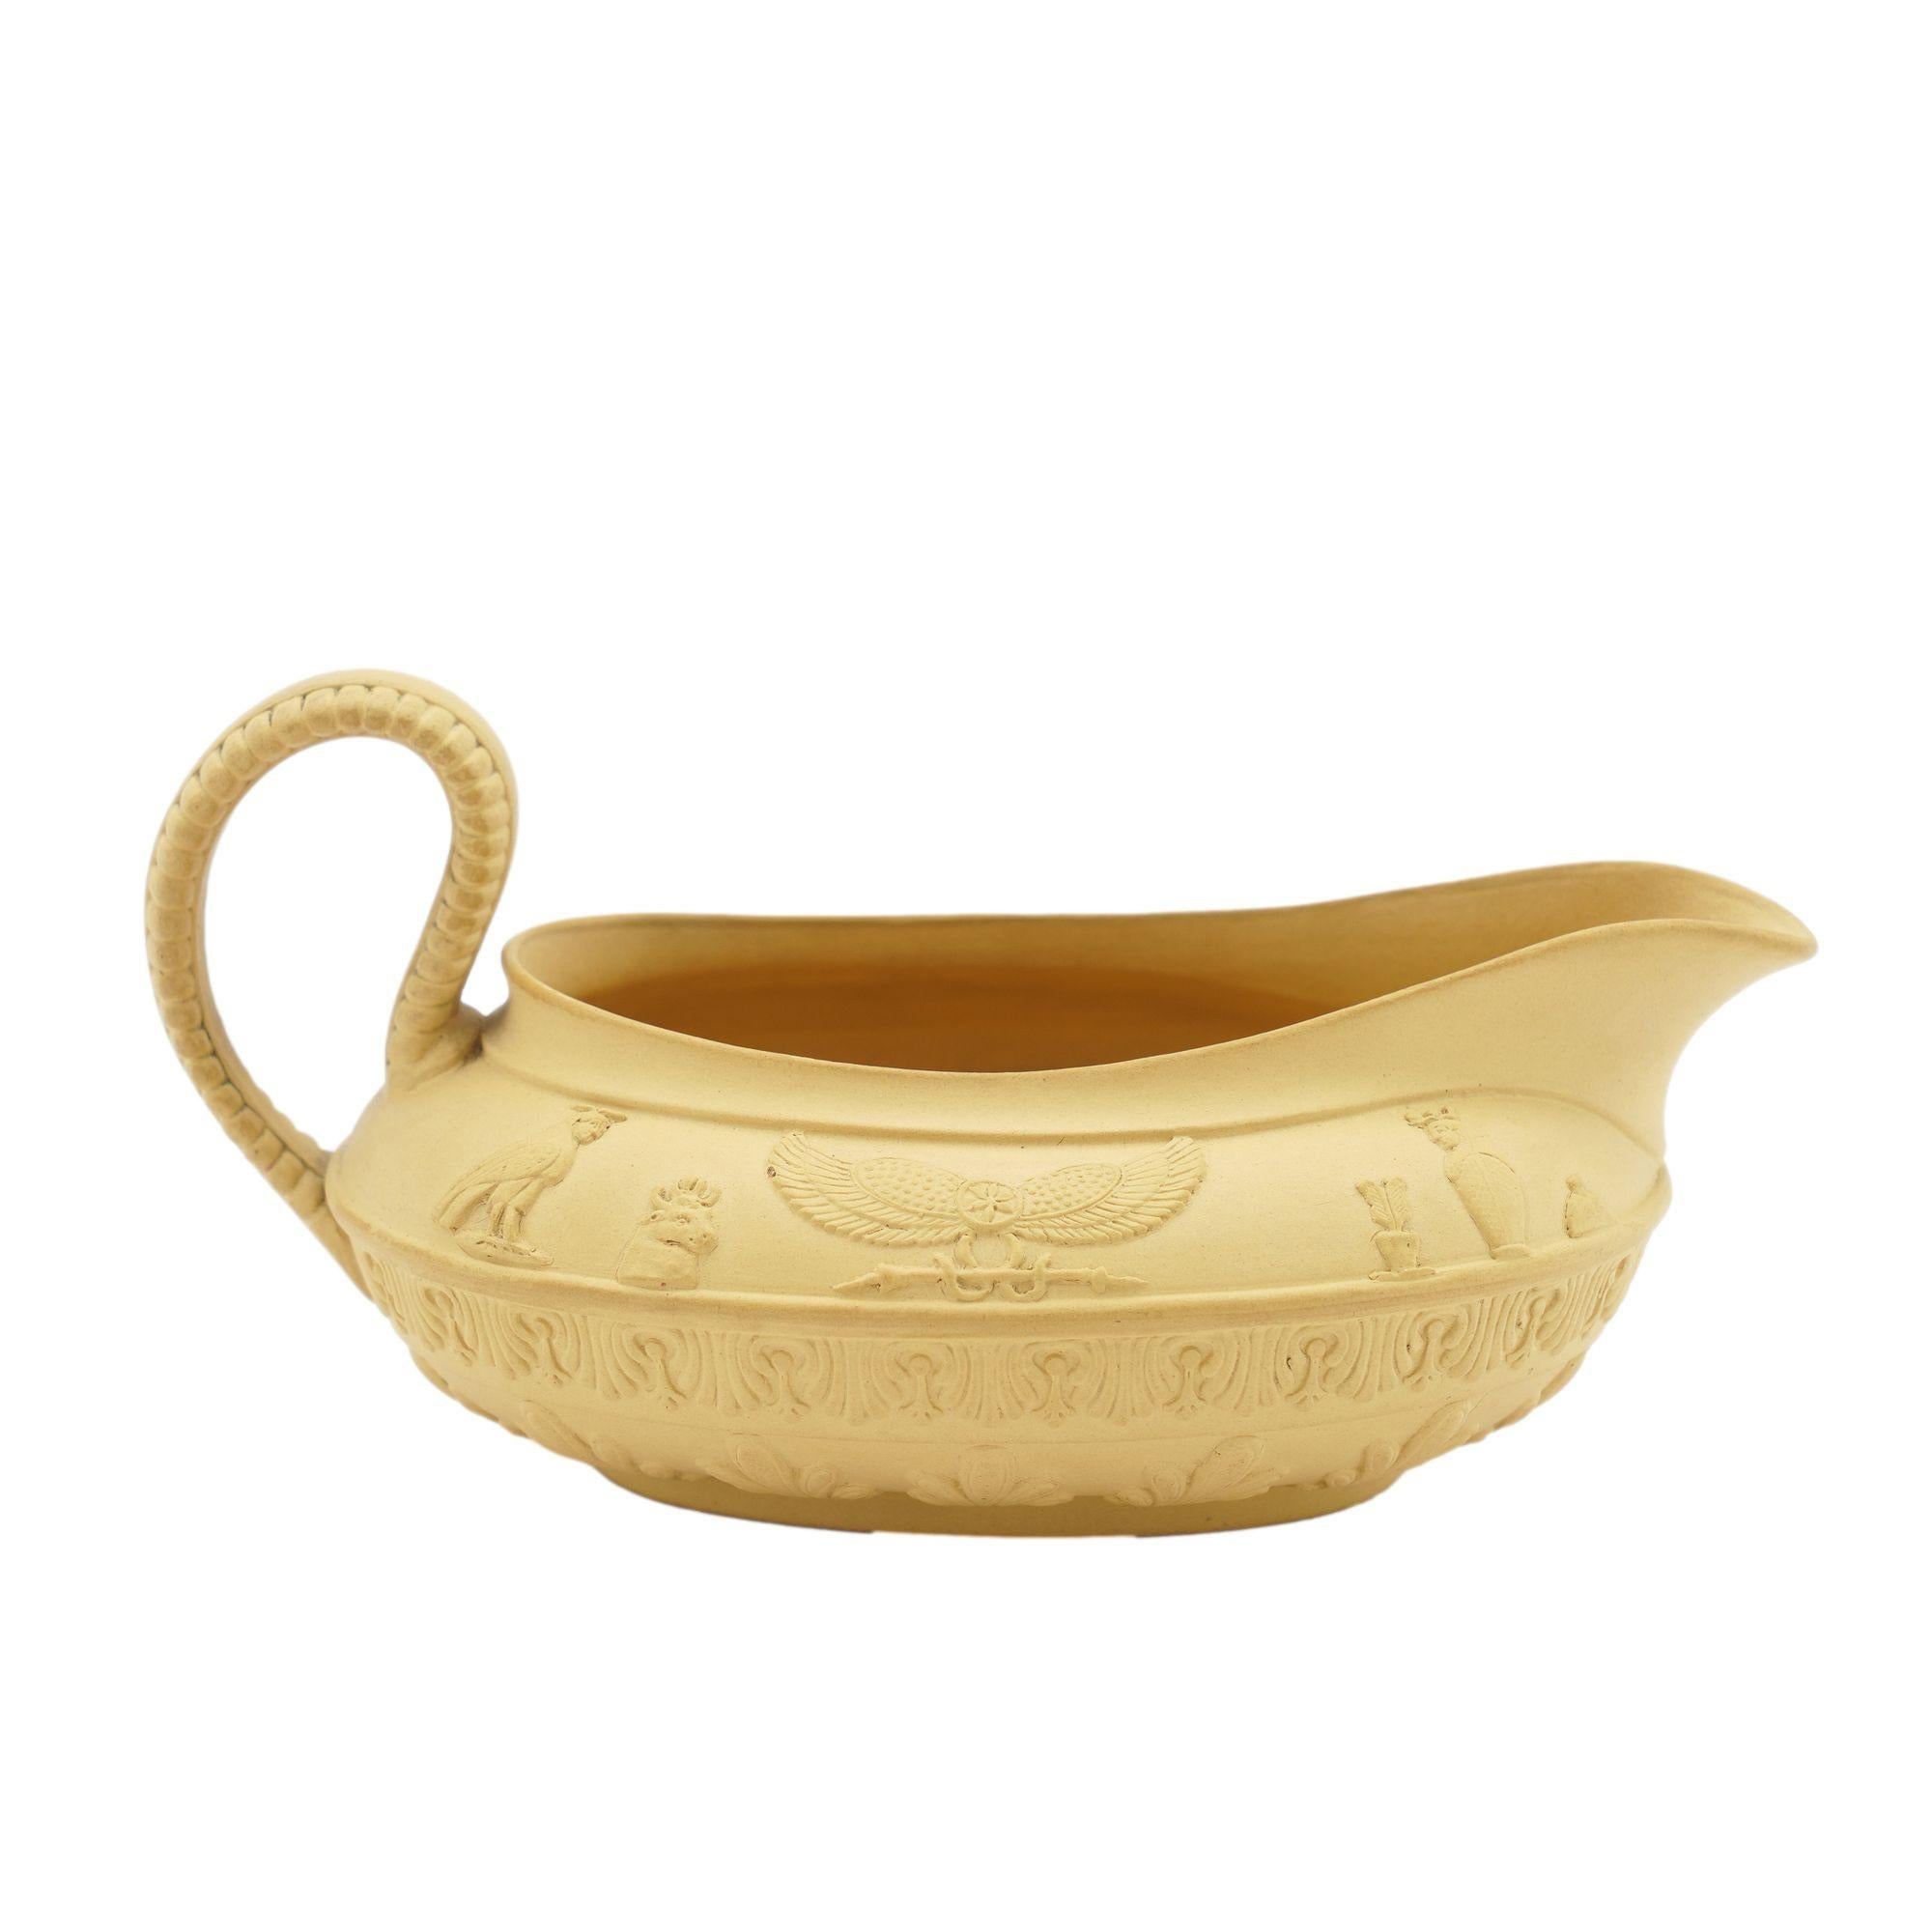 Caneware tea set in the Egyptian taste by Schiller & Gerbing, c. 1835 For Sale 11